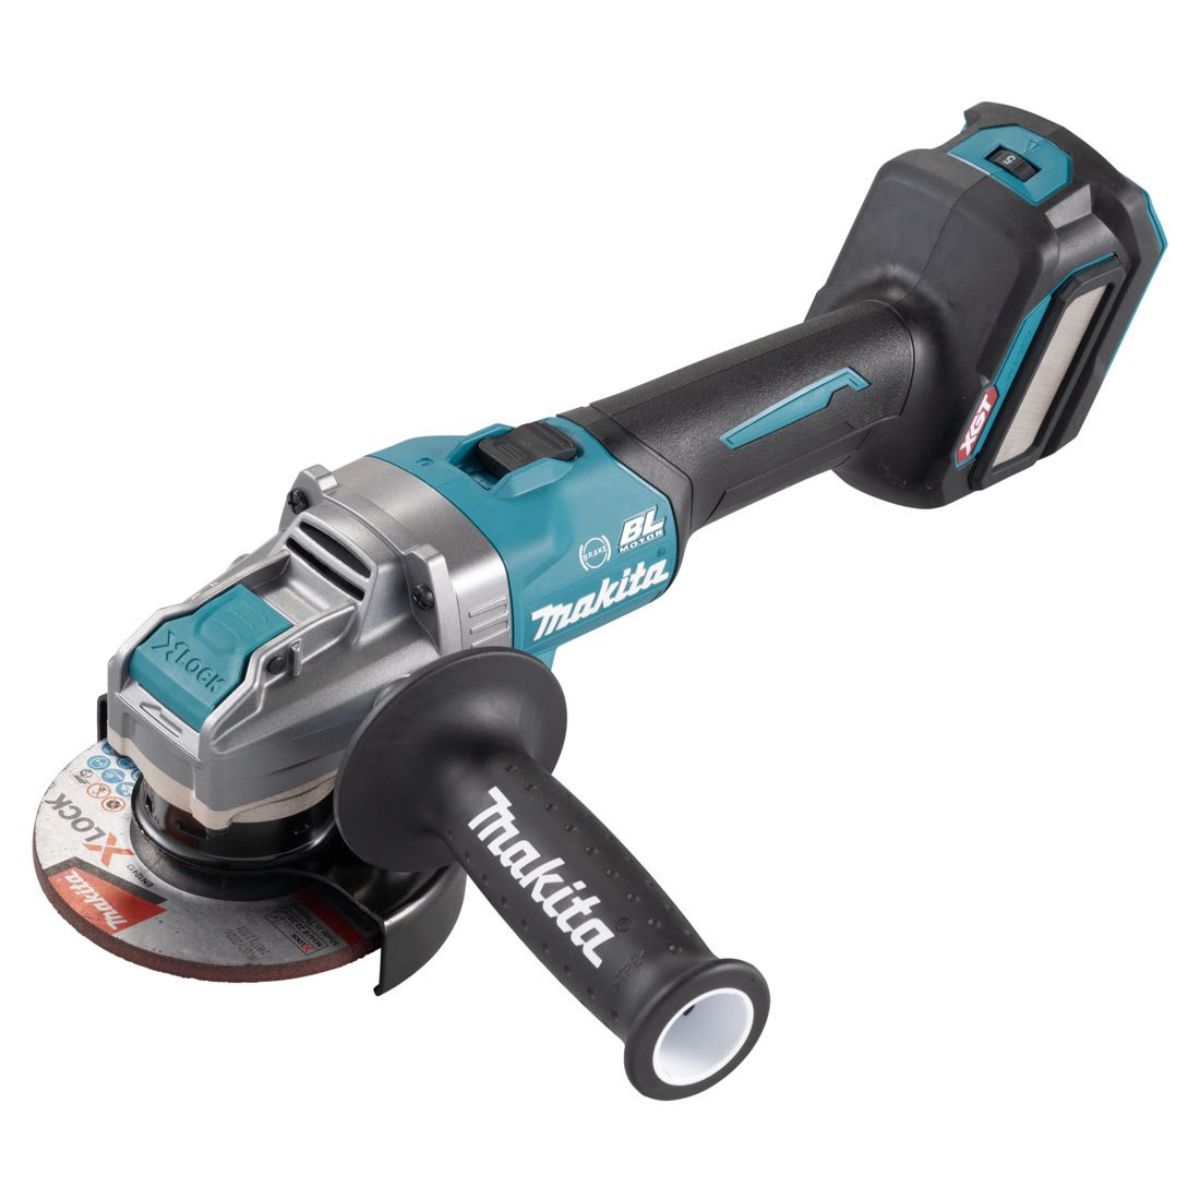 Makita GA040GZ01 40v XGT Max 115mm Brushless Angle Grinder Body Only With Carry Case